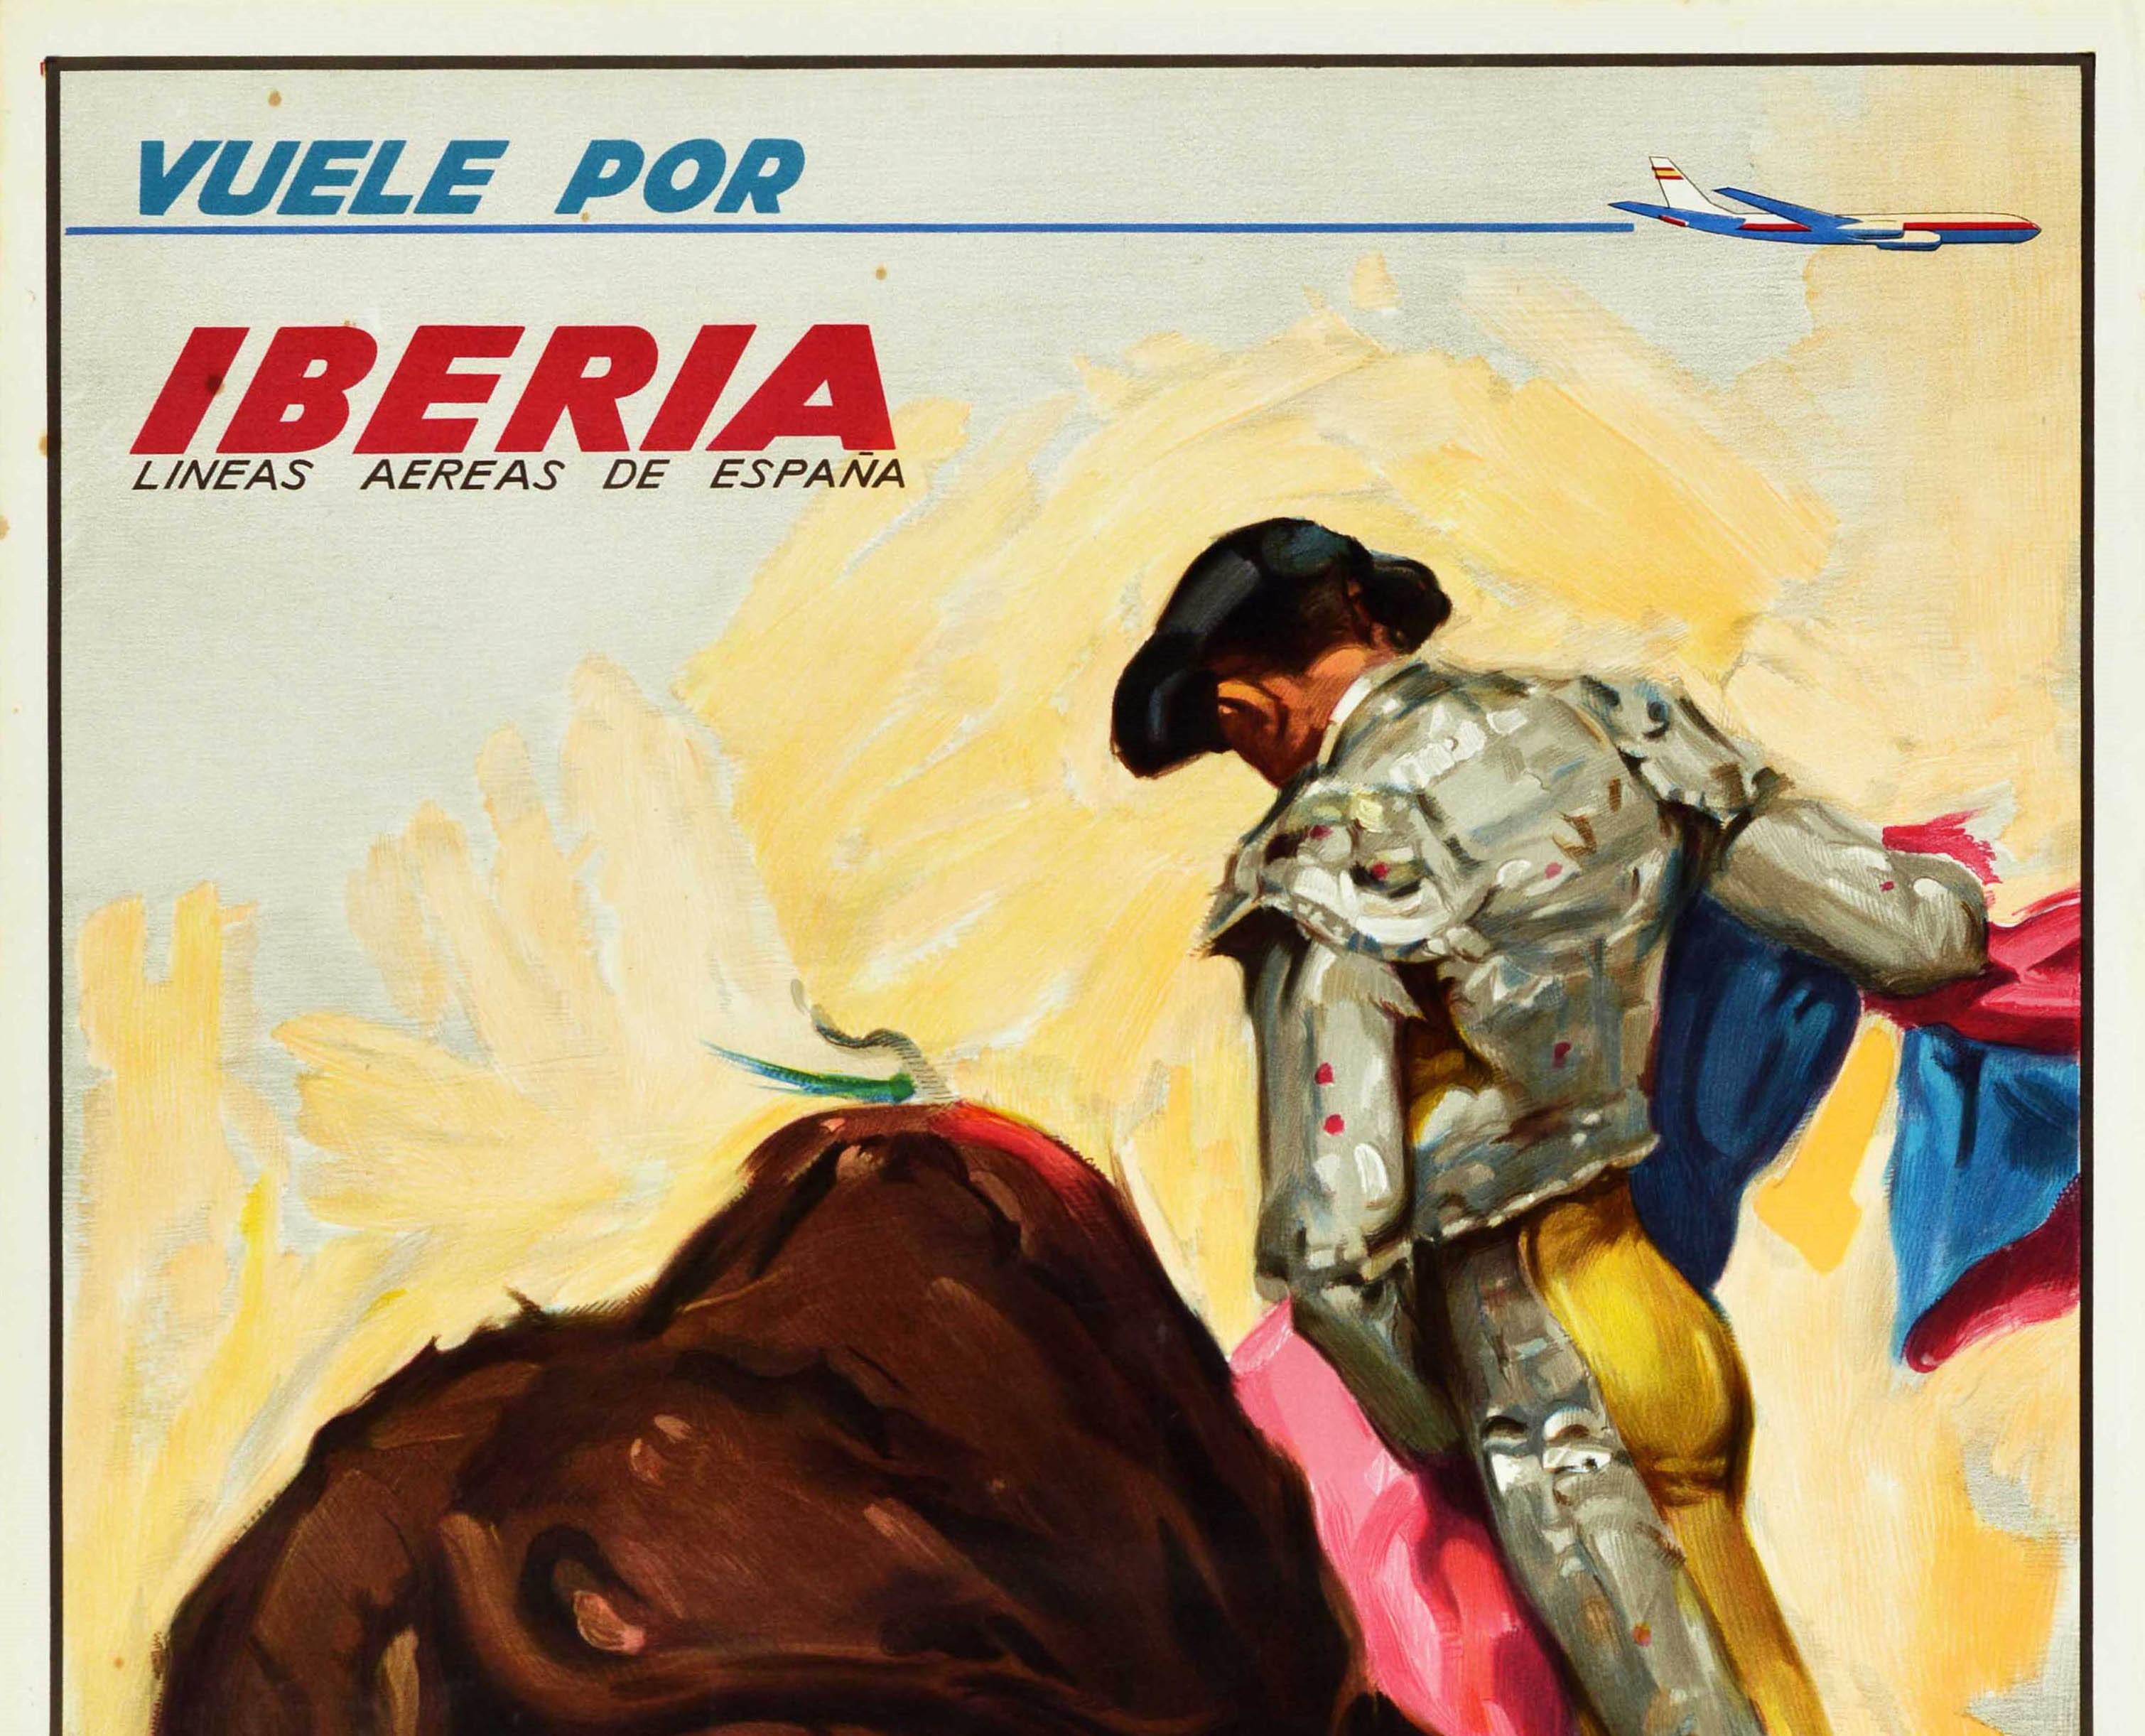 Original vintage travel poster - Vuele por Iberia Lineas Aereas de Espana / Fly with Iberia Airlines of Spain - featuring a colourful image of a bullfight with the torero / bullfighter wearing a traditional uniform and holding a colourful cape as a